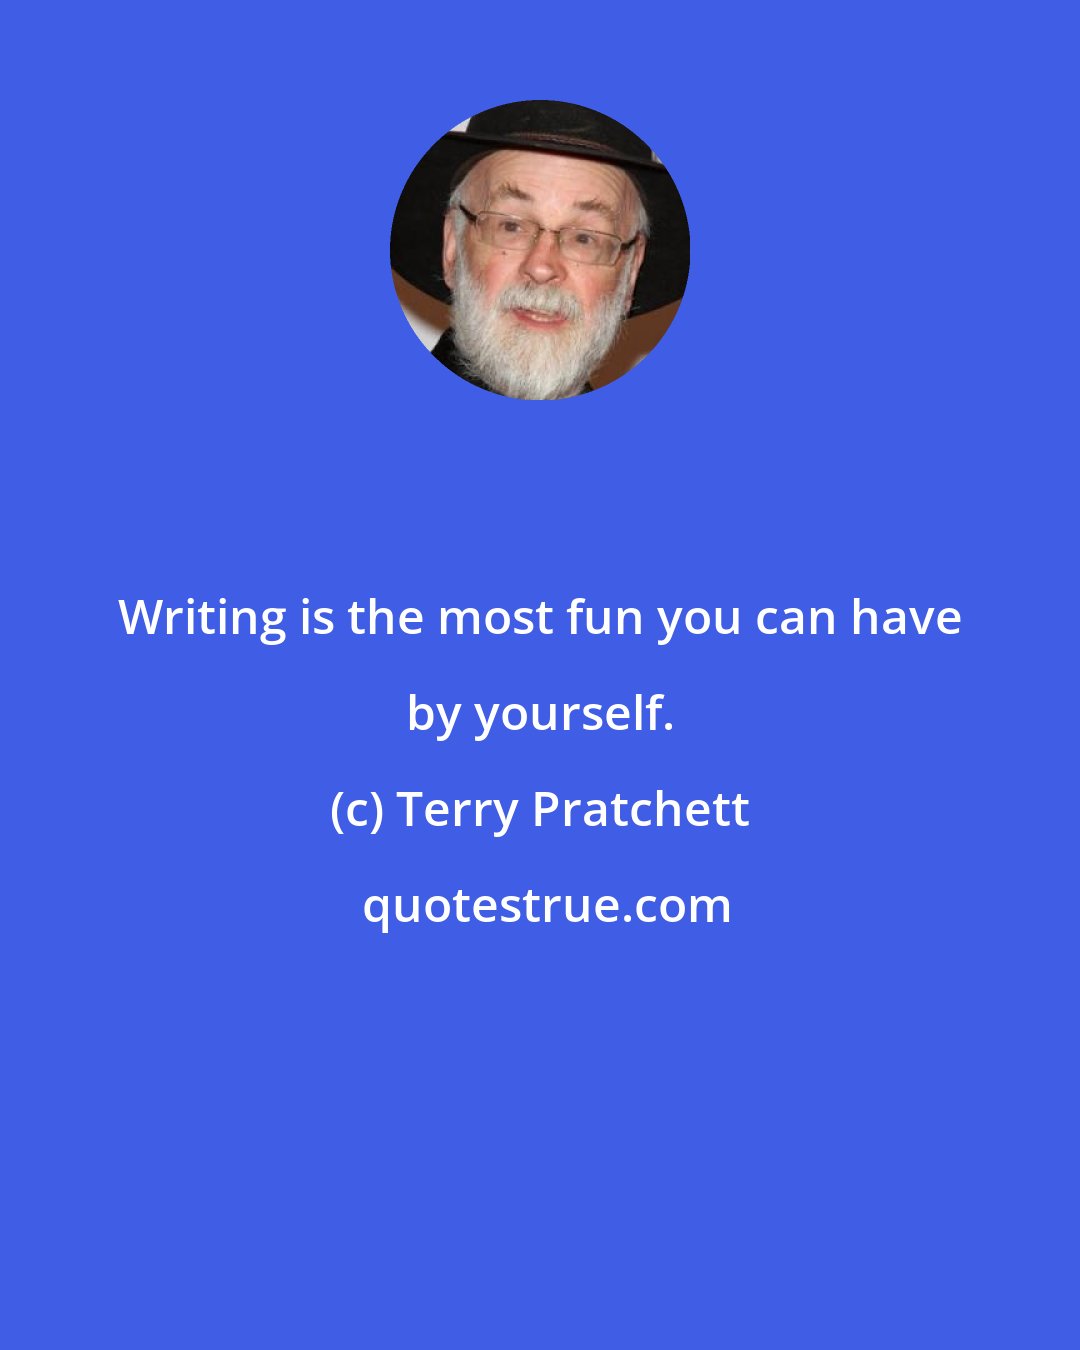 Terry Pratchett: Writing is the most fun you can have by yourself.